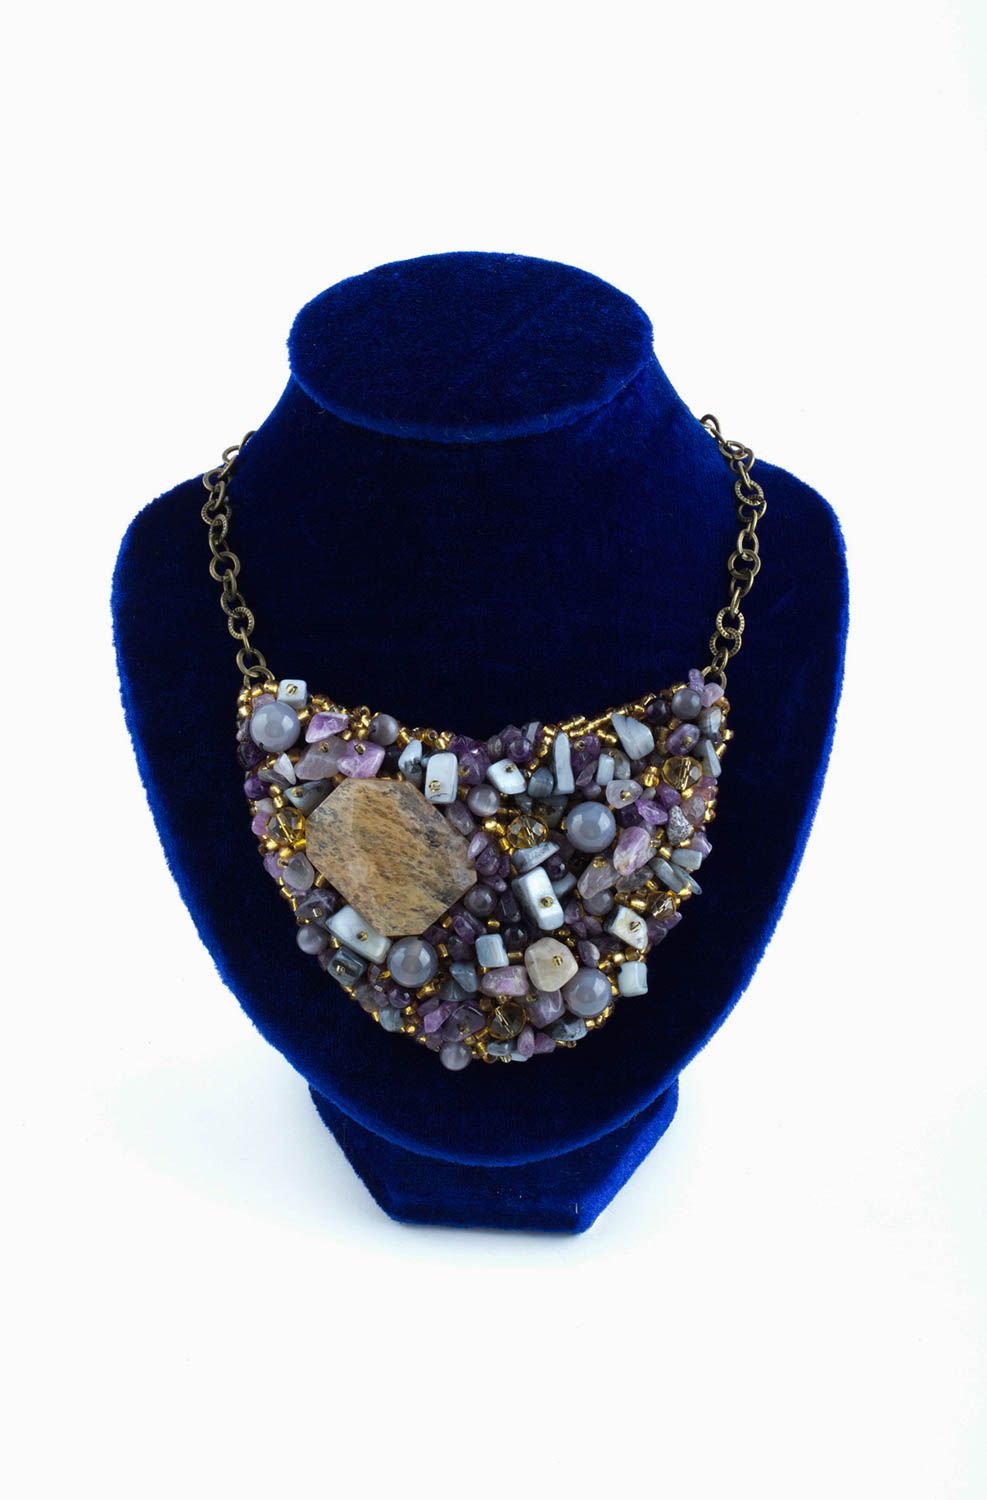 Handmade unusual necklace elegant evening necklace jewelry with natural stone photo 2